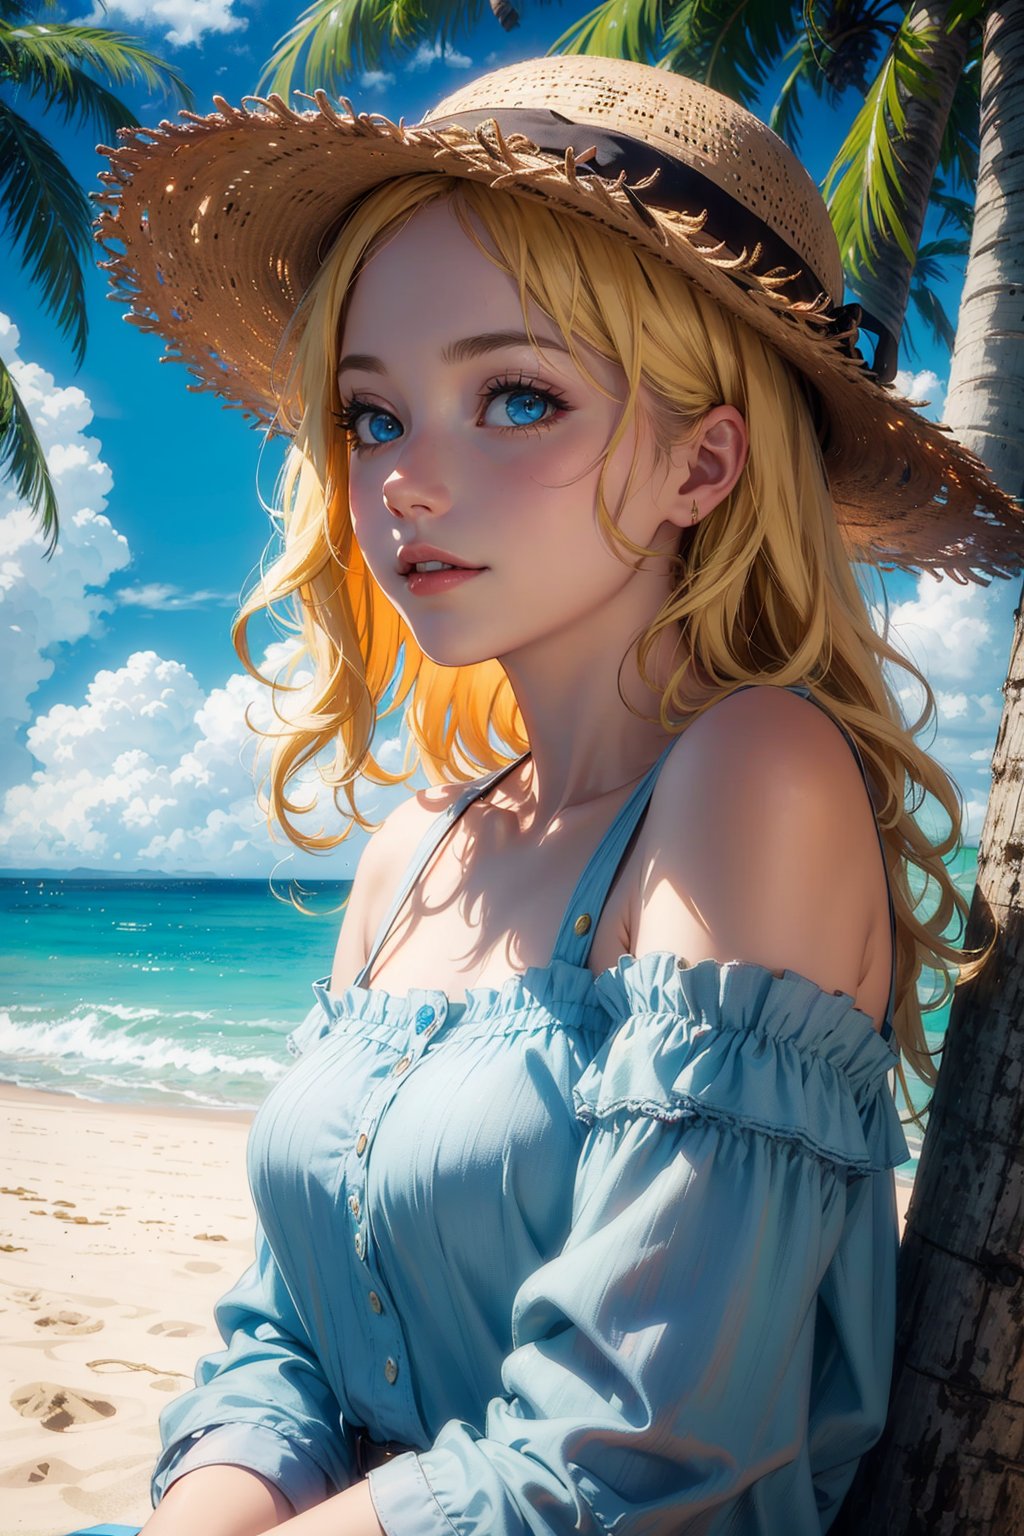 rococo style,(movie poster:1.2), soft lighting, (dramatic angle:1.25),(solo:1.4), (1girl),((blonde hair), long curly hair), blue eyes, (smile),beach straw hat, (off-shoulder shirt), hat flower ,(looking to the side:1.3), fantastic colorful, sea ,coconut tree, blue sky with clouds,(beach:1.3) ,(masterpiece:1.2),ultra-detailed,(best quality), illustration, (Depth of field),